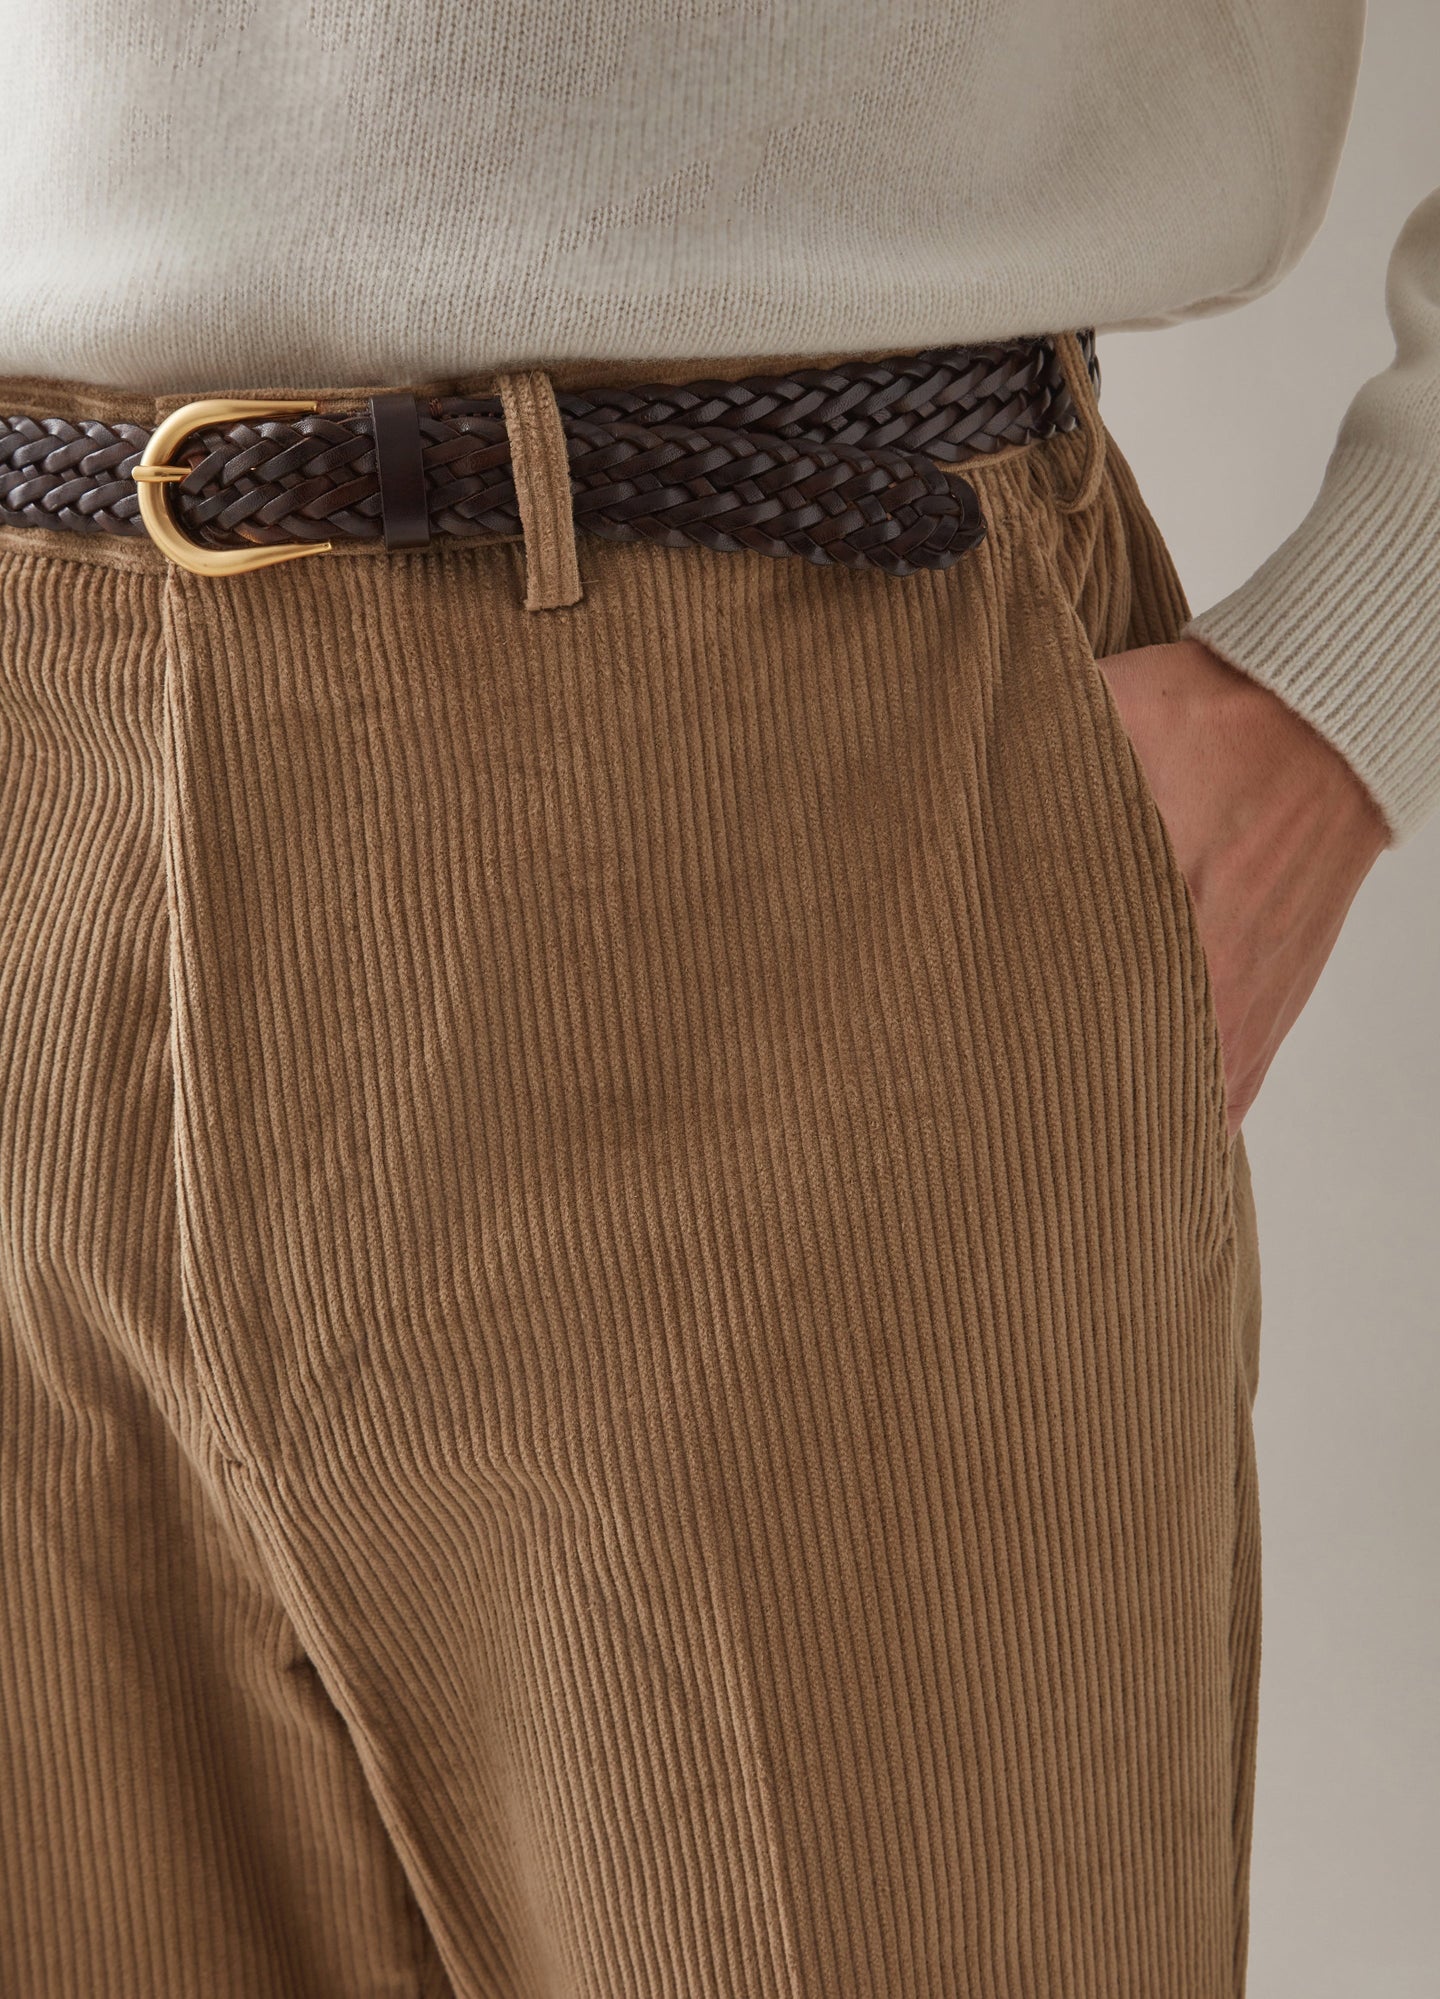 Buy Mens Jumbo Cord Trousers - Fast UK Delivery | Insight Clothing